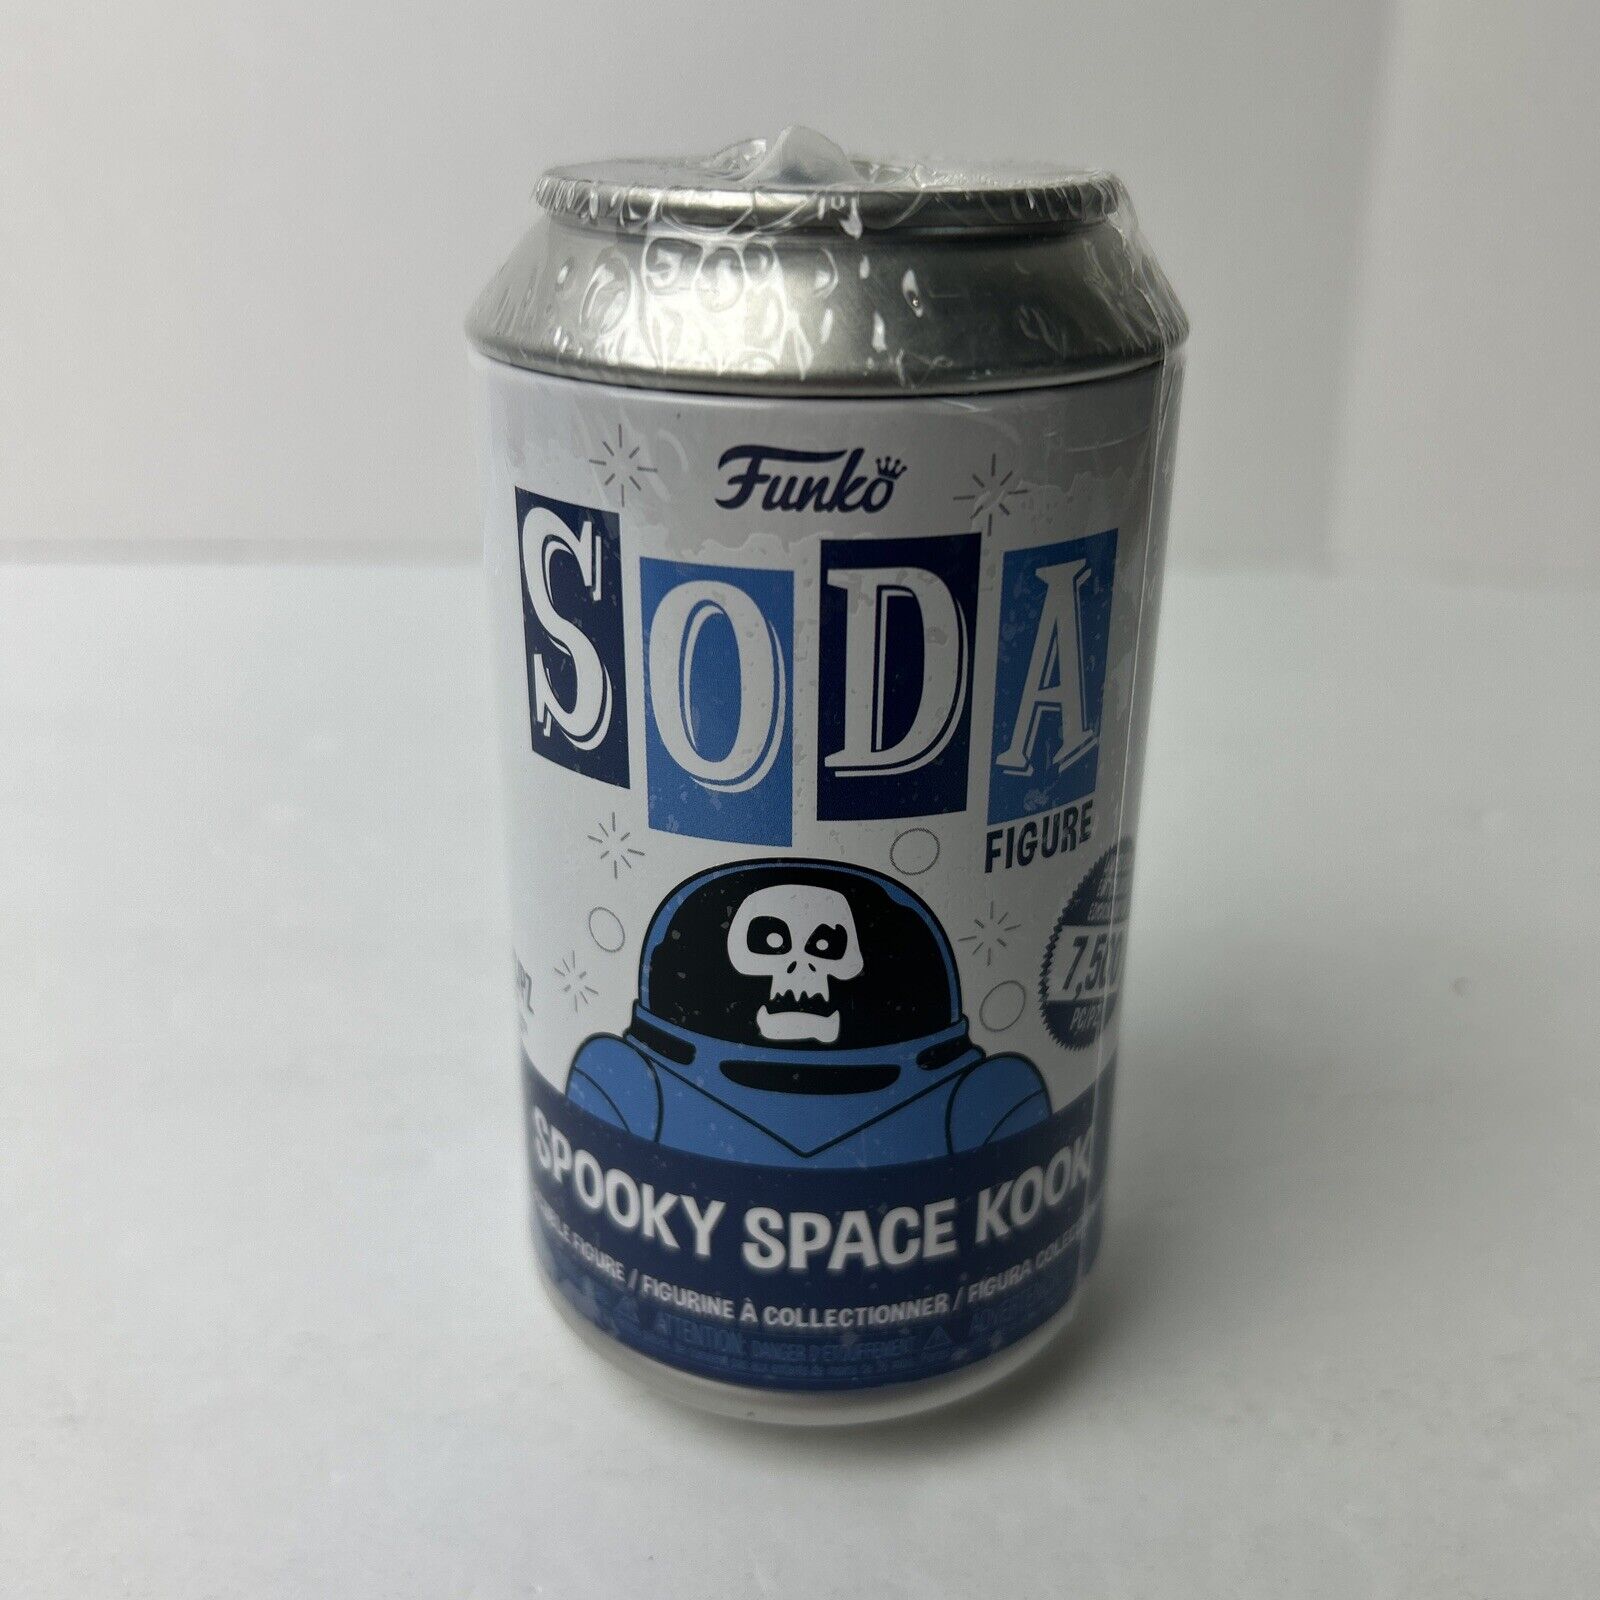 Funko Soda Scooby-Doo Spooky Space Kook With Chance of Chase (New/Sealed)